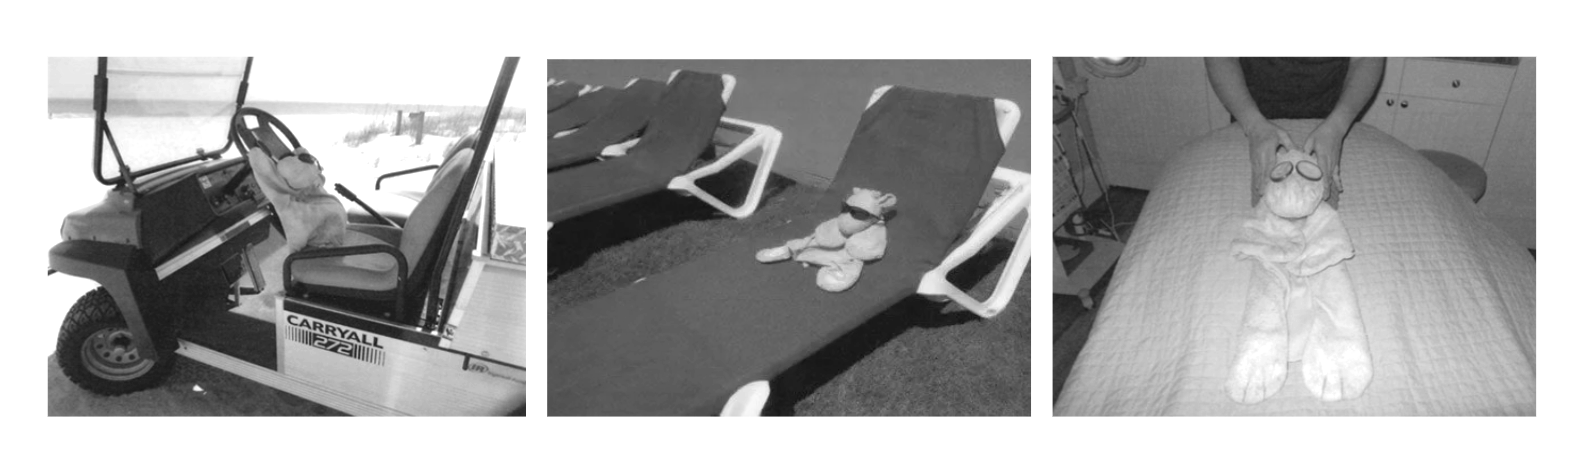 Three black and white photos of a stuffed giraffe: 1. driving a beach trolley, 2. sunbathing on a deck chair and 3. getting massages on a massage table.